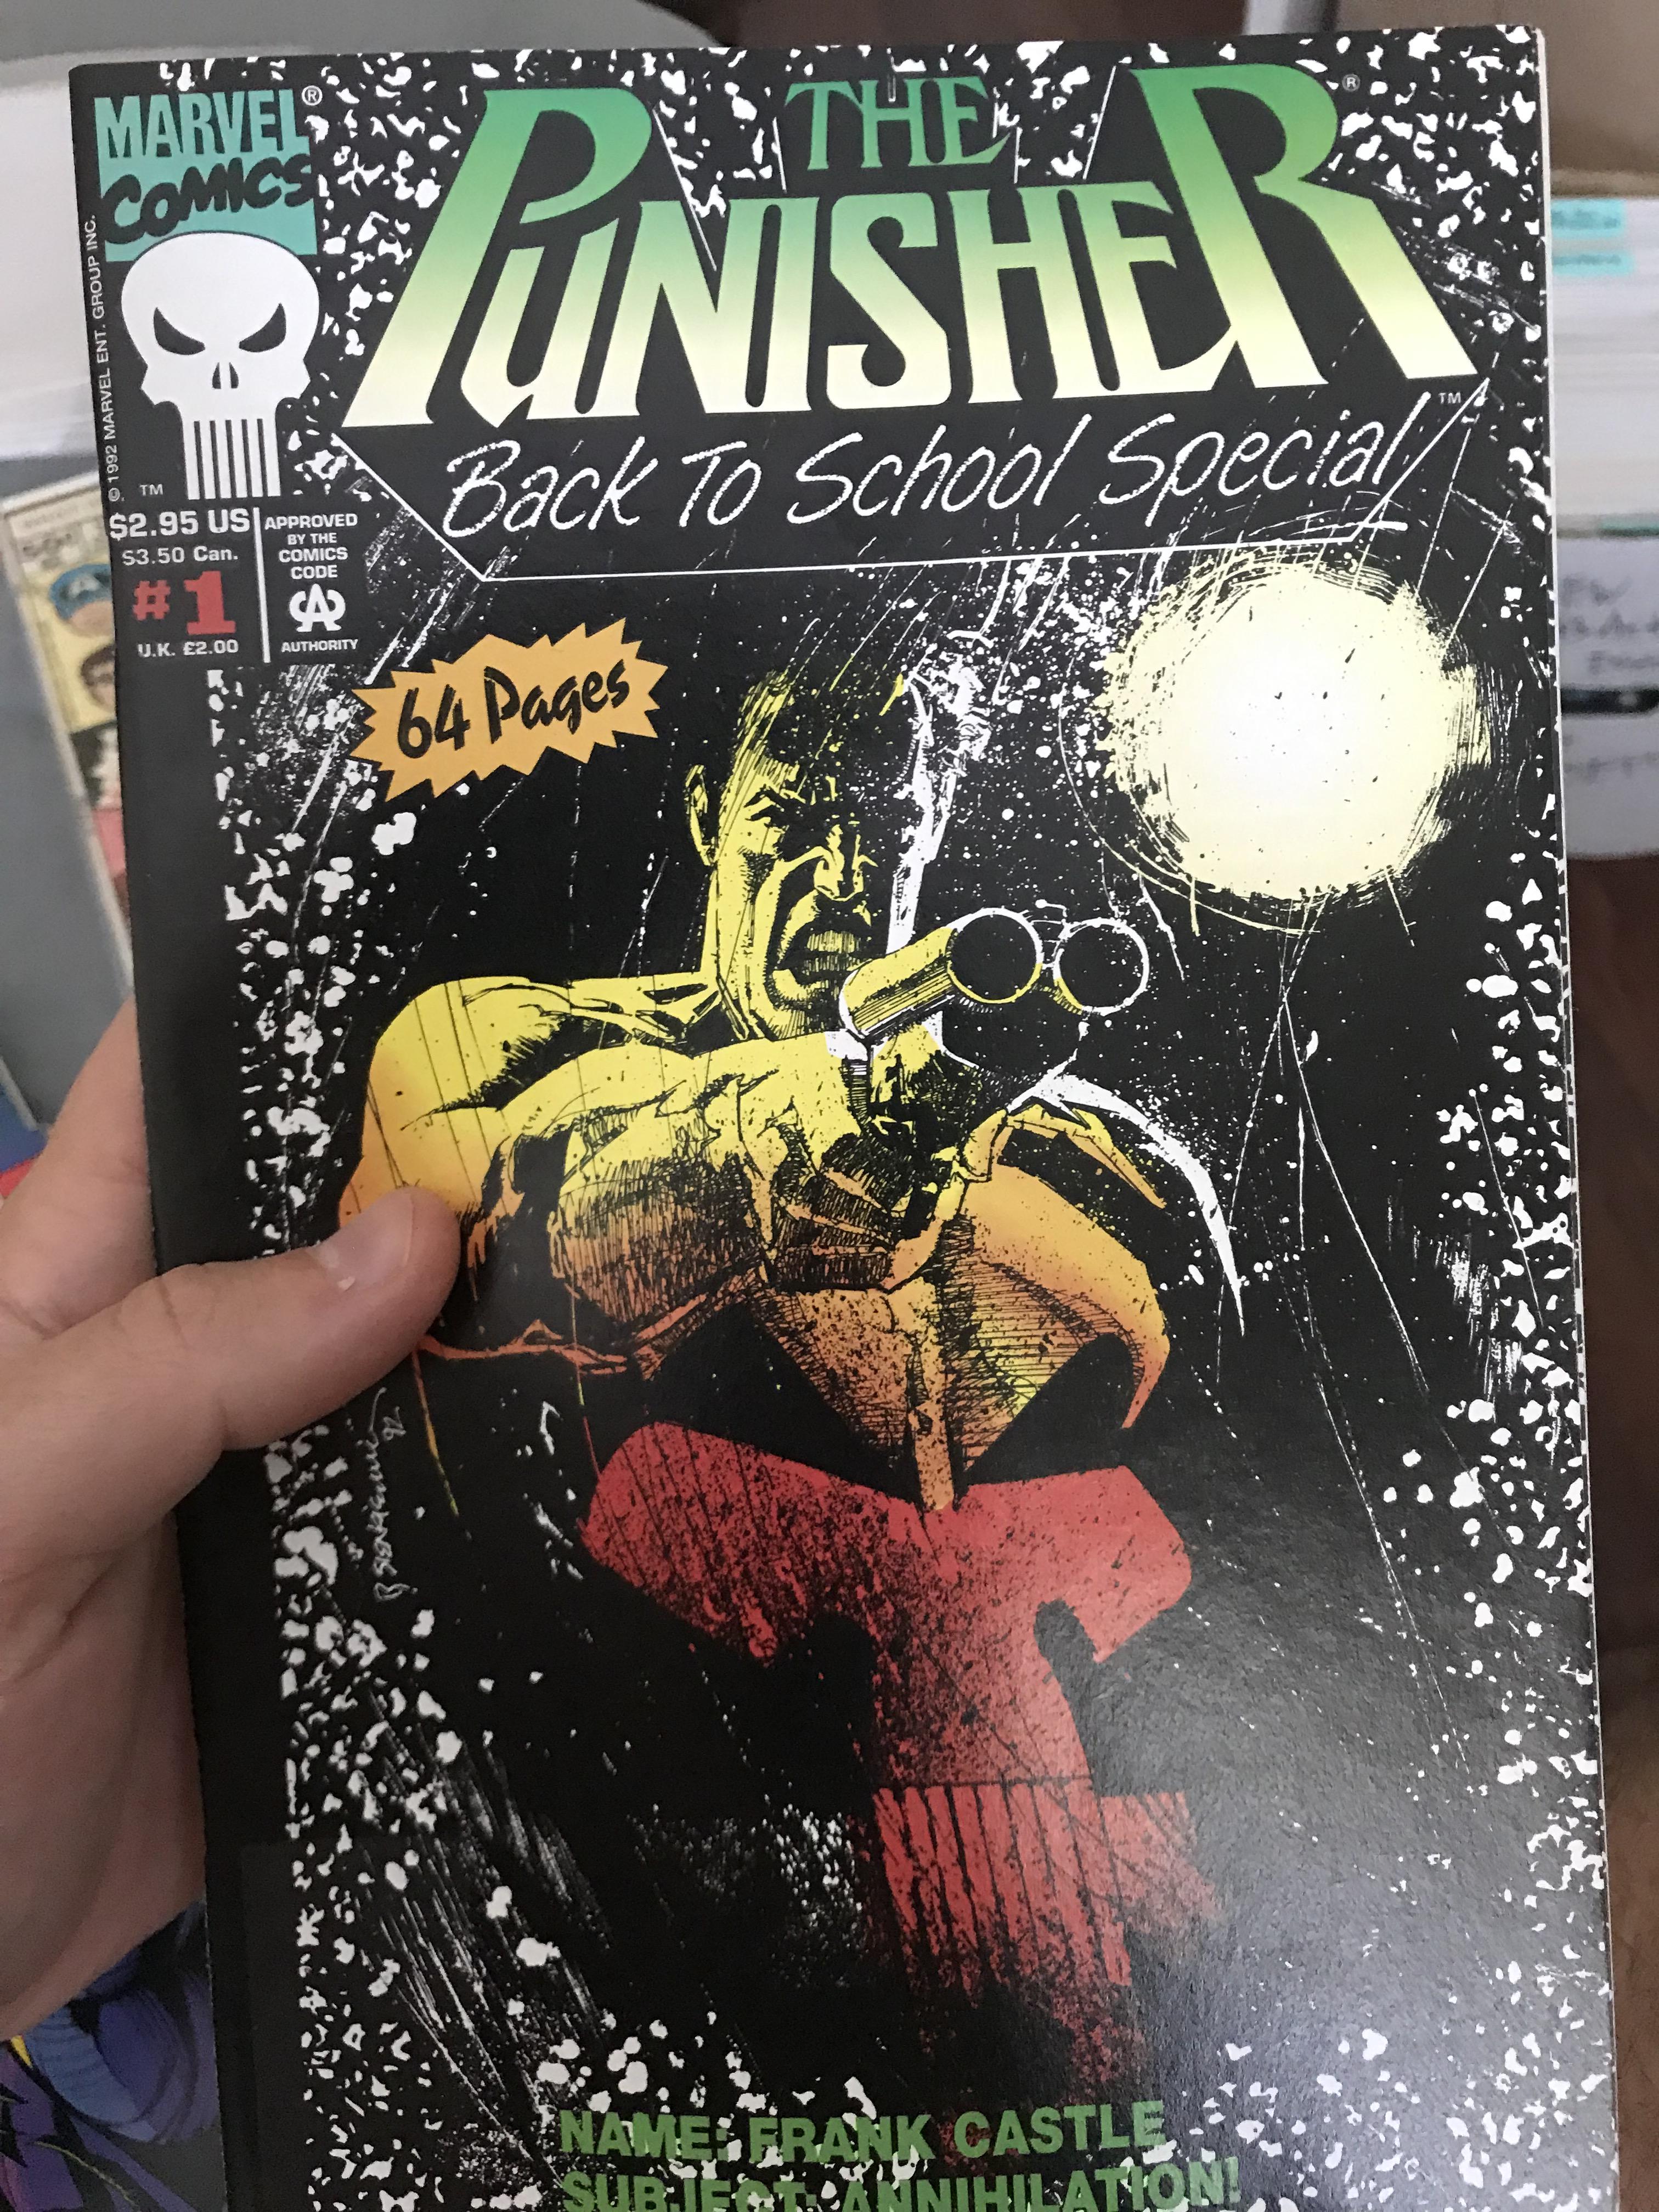 punisher back to school special - Punishetti Back to Schools 64 Pages Mihisation